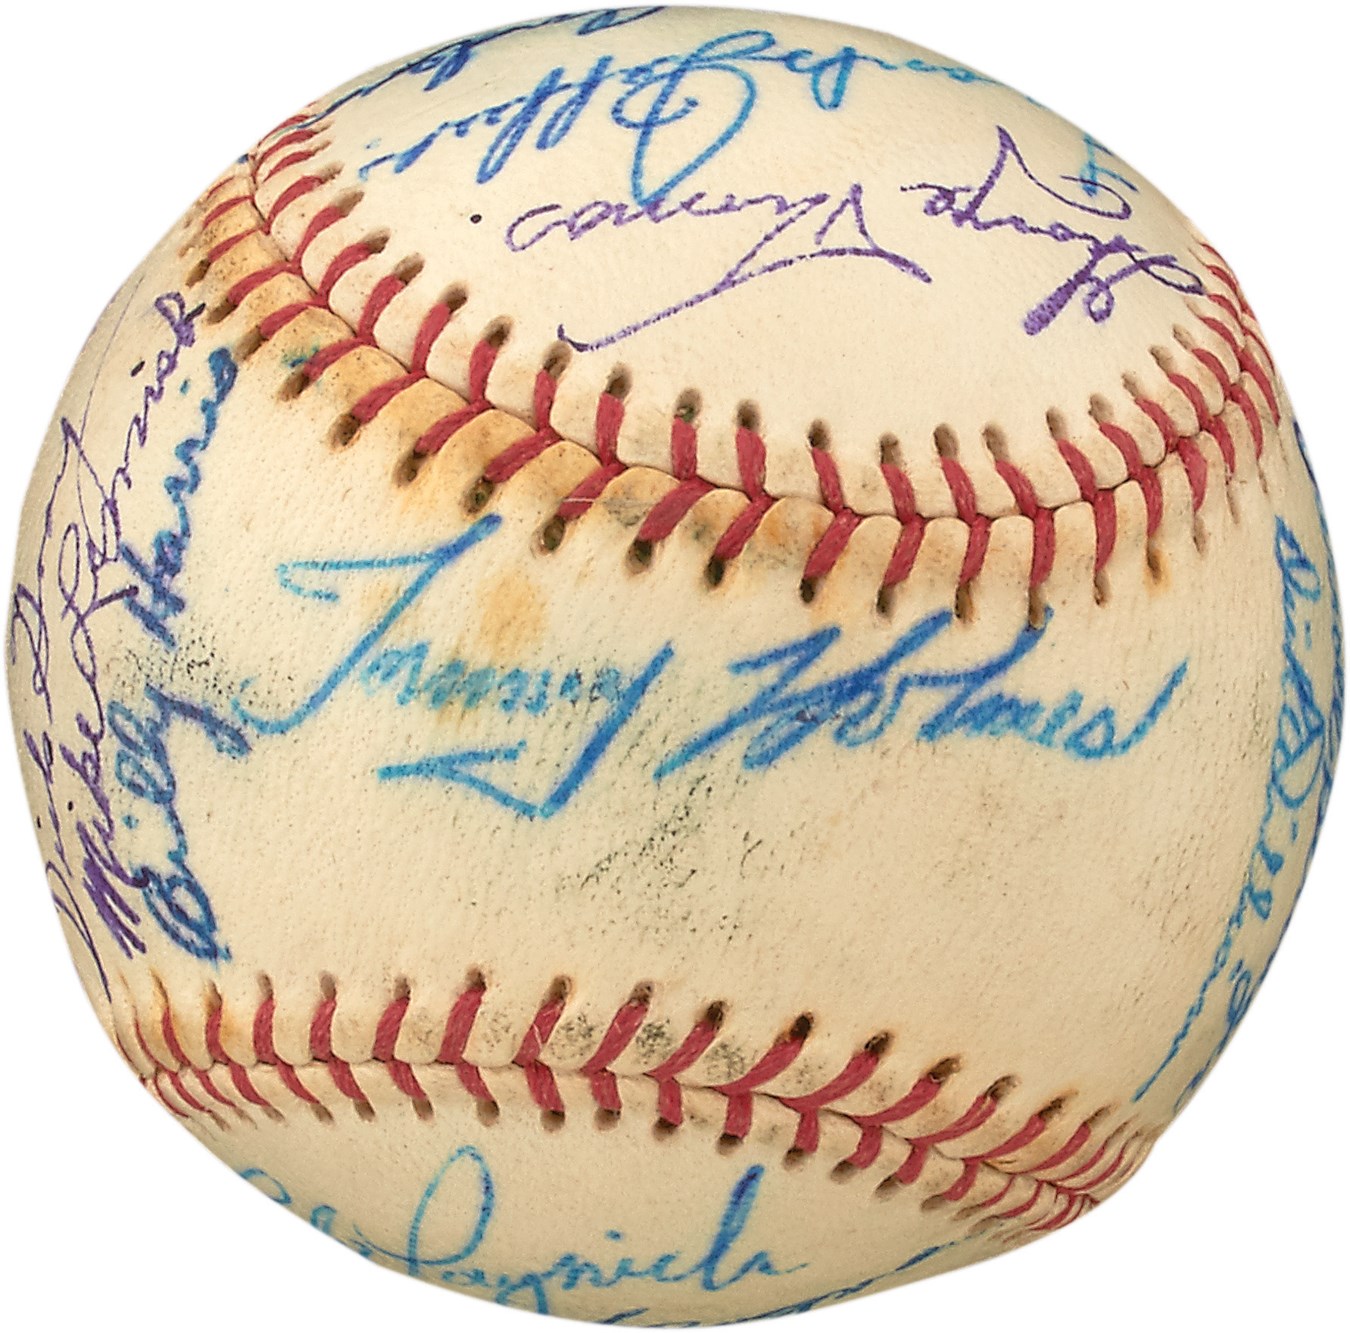 - Circa 1958 Montreal Royals Team-Signed Baseball with Early Sparky Anderson